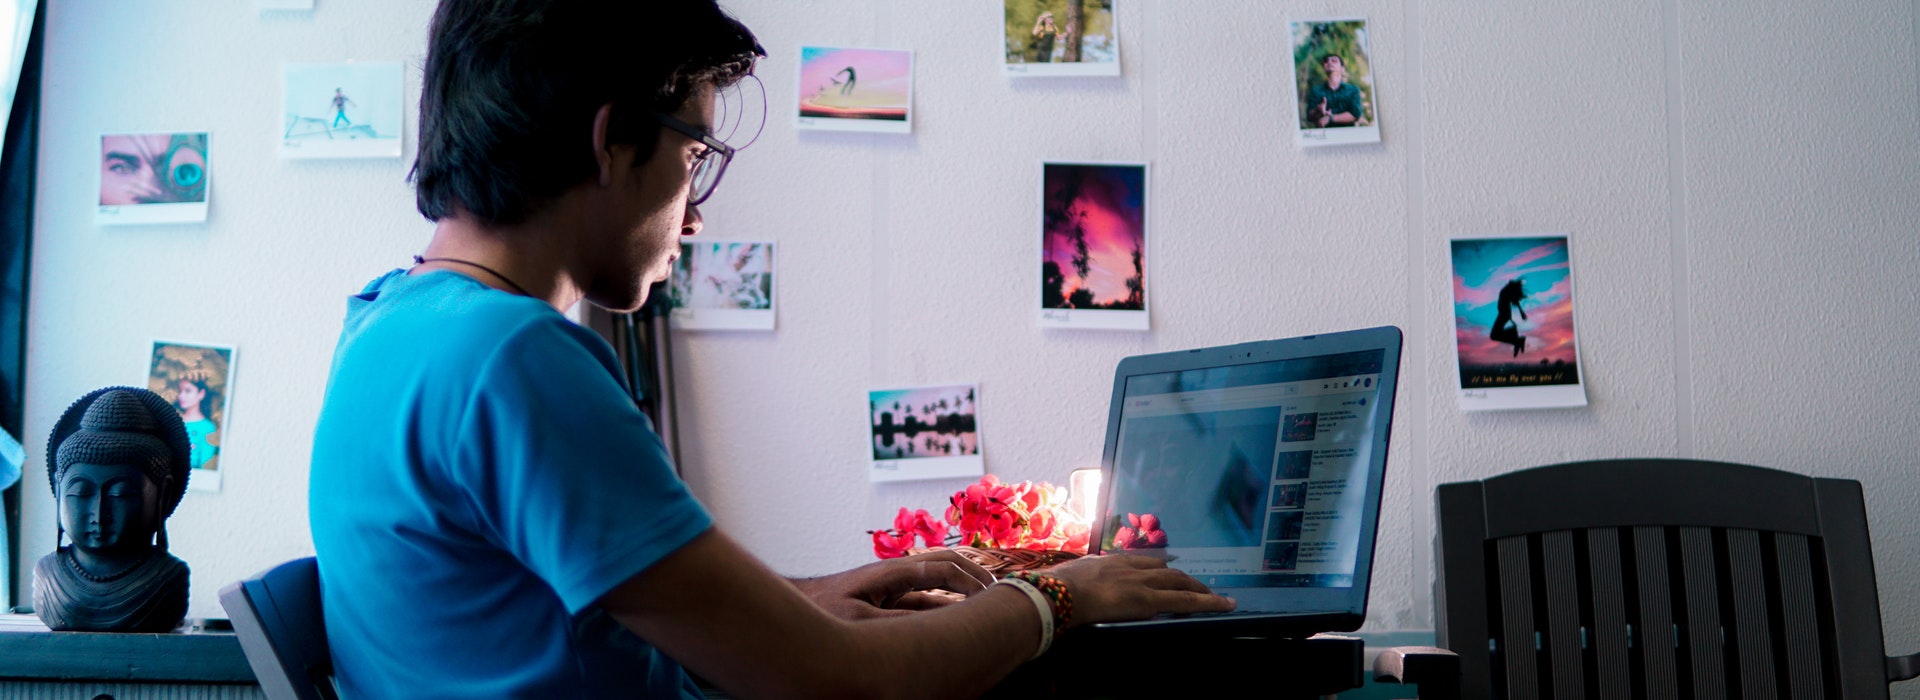 Photo: a young man with glasses types on a laptop